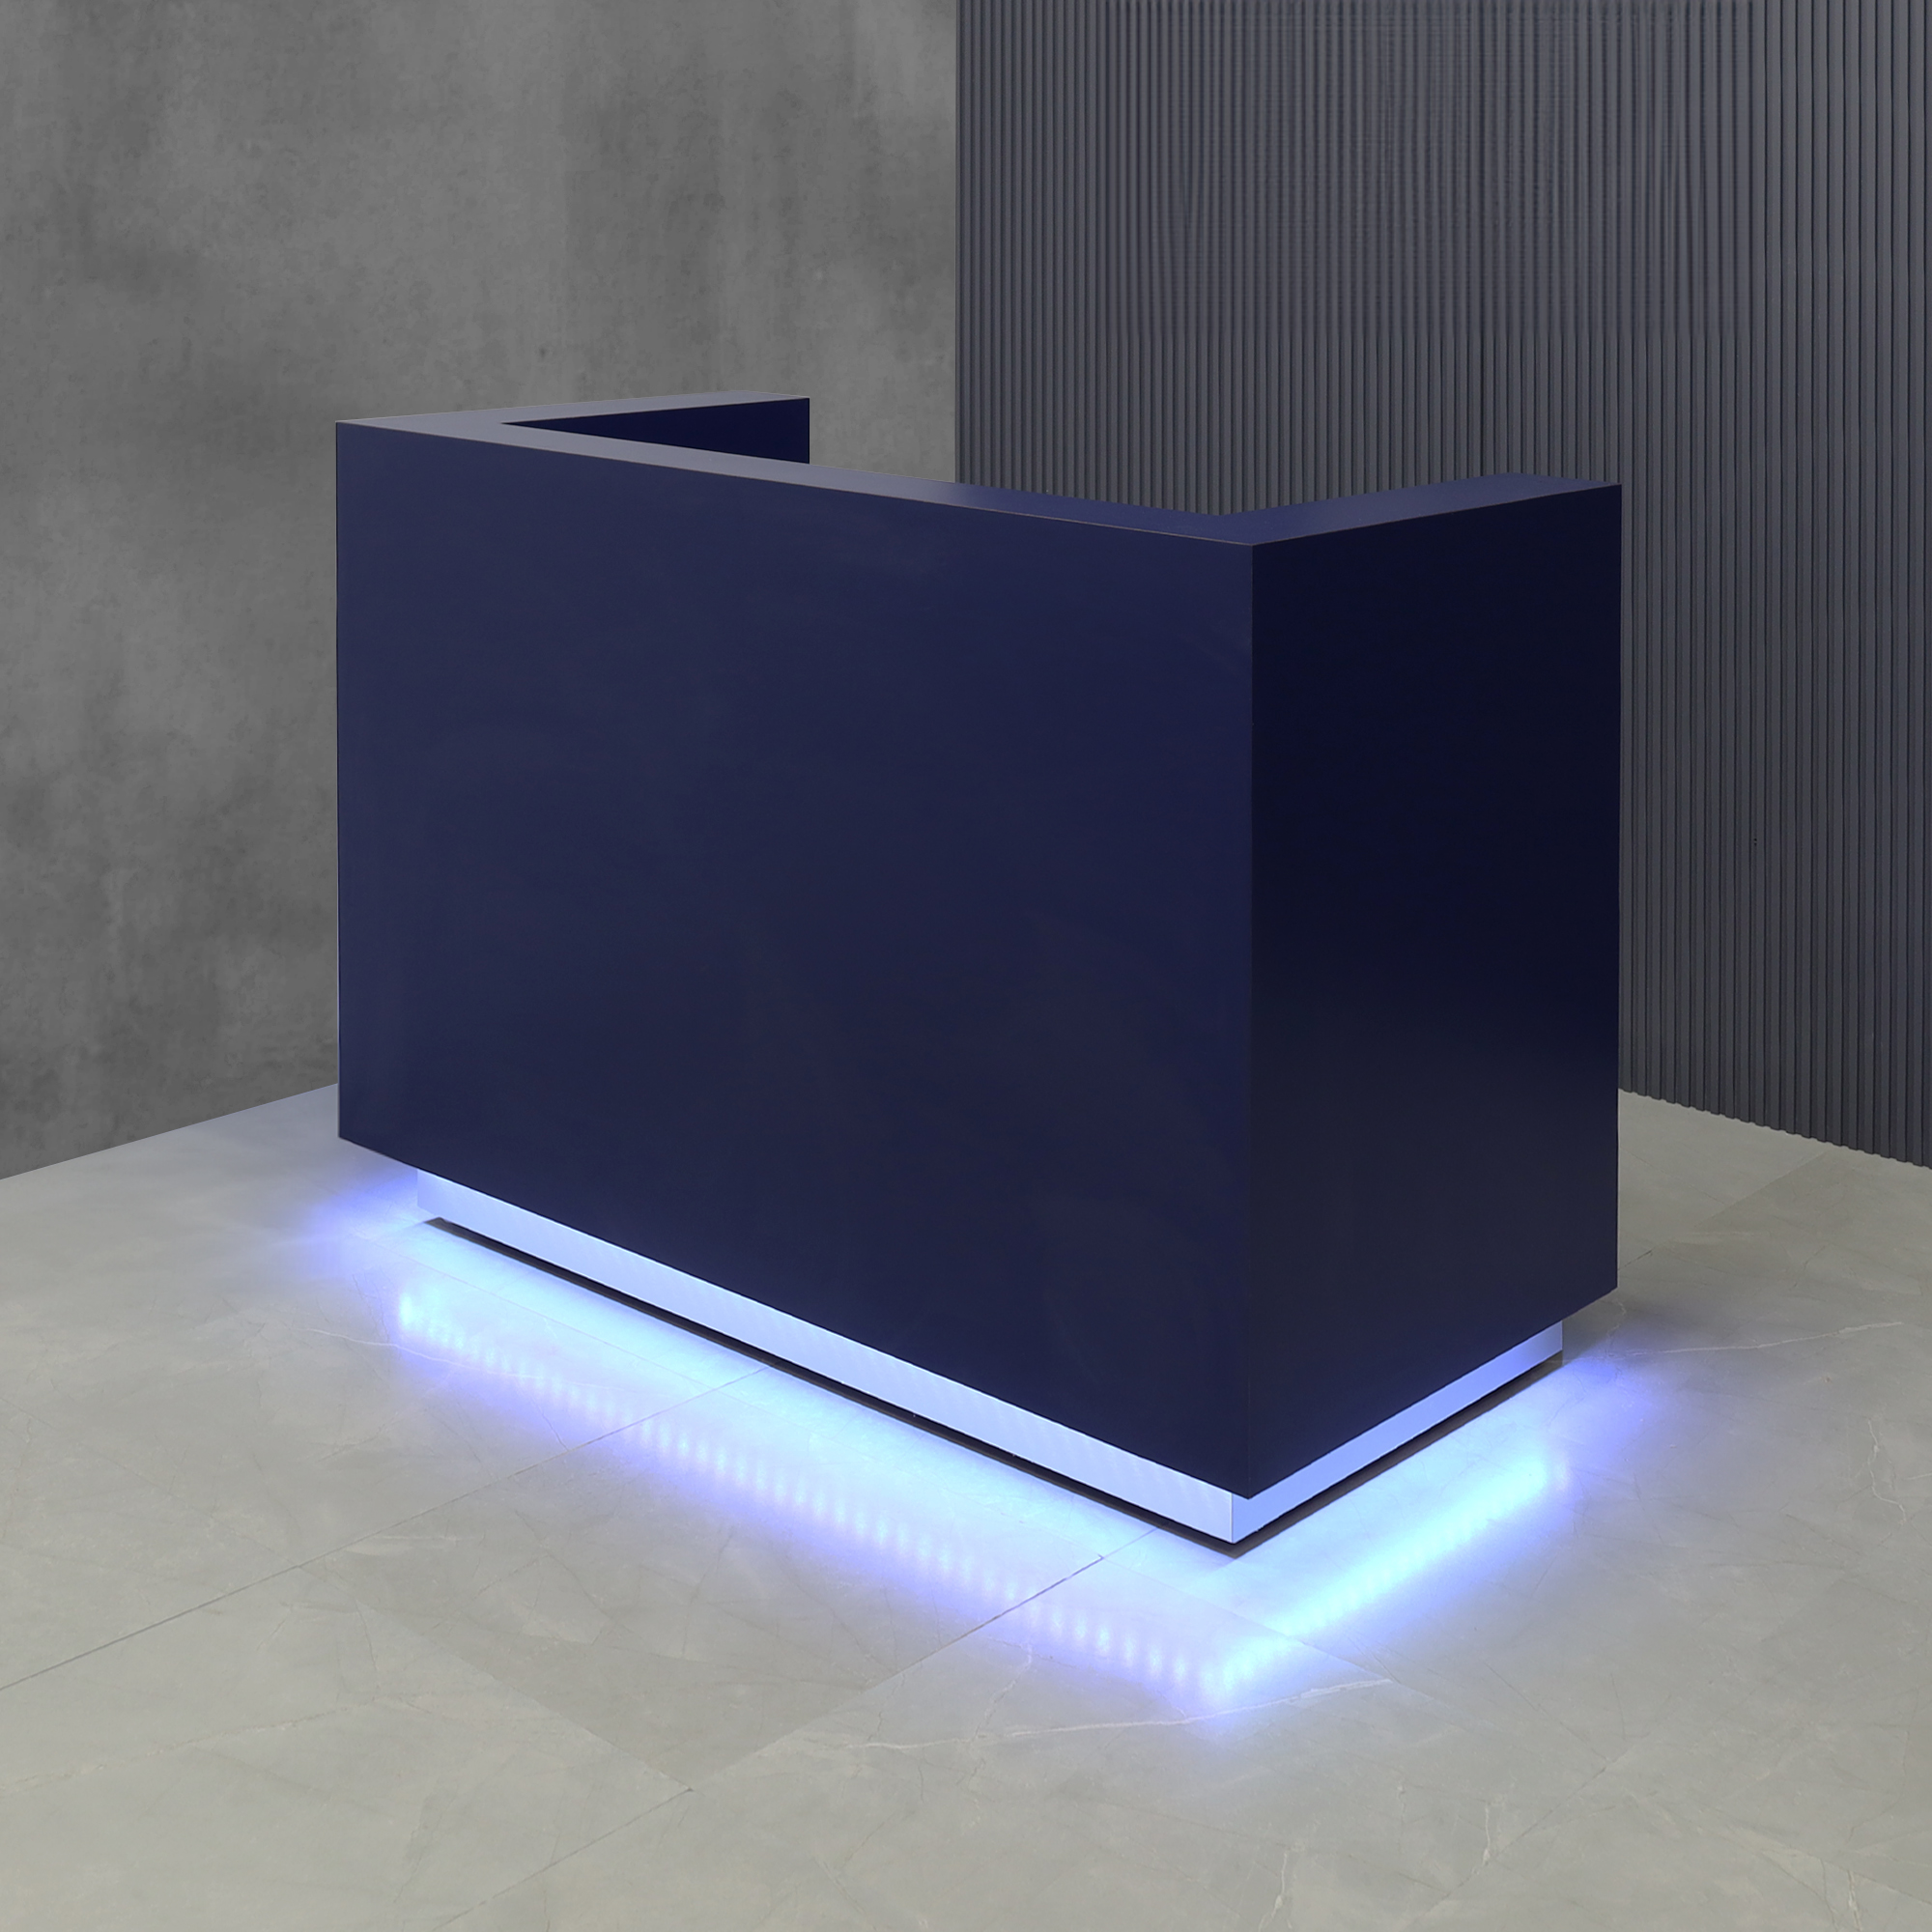 60-inch Dallas U-Shape Custom Reception Desk in navy blue matte laminate main desk and brushed aluminum toe-kick, with color LED, shown here.